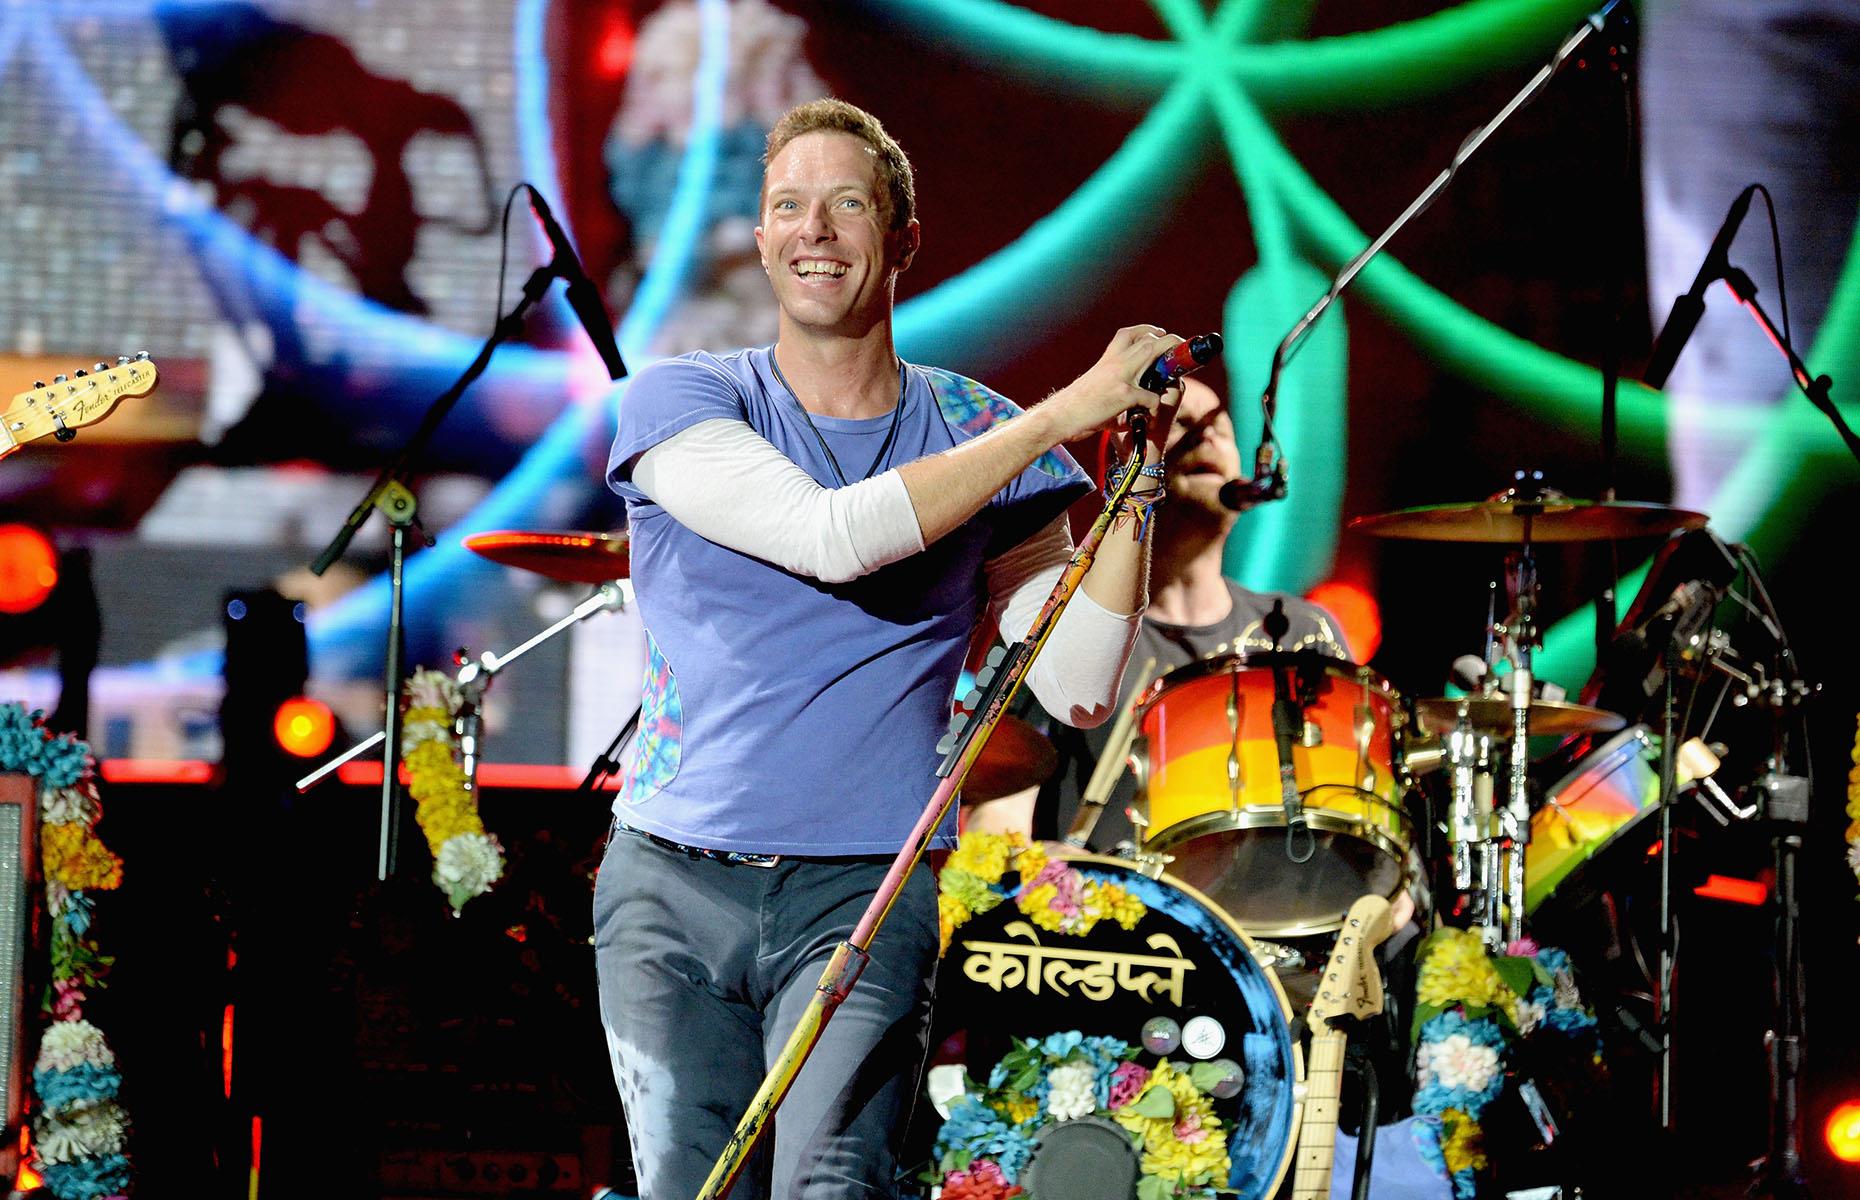 <p>In 2015, British rockers Coldplay announced their <em>A Head Full of Dreams Tour</em>, in support of their critically acclaimed studio album of the same name. Between 2016 and 2017, the band embarked on a 122-show tour around the world, performing to over five million fans across five continents and 31 countries.</p>  <p>At the time, <em>A Head Full of Dreams Tour</em> was the third highest-grossing tour ever, raking in $523 million, or $673 million in 2024 money.</p>  <p>However, despite this impressive gross, it isn't Coldplay's highest-earning tour to-date. More on that soon...</p>